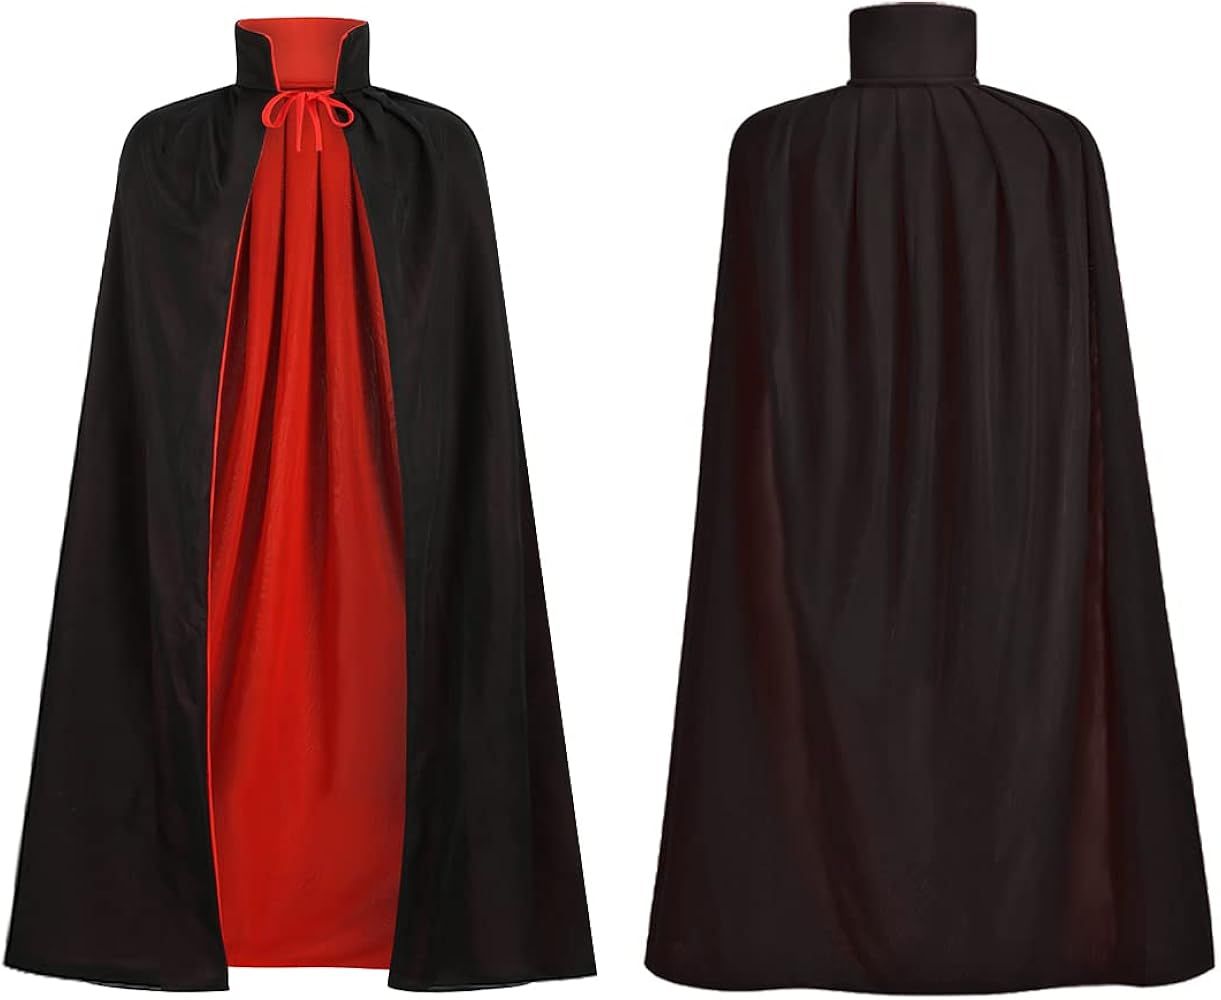 yolsun Black&Red Reversible Cape for Adult, Halloween Costume Witch Vampire Cape Costume | Amazon (US)